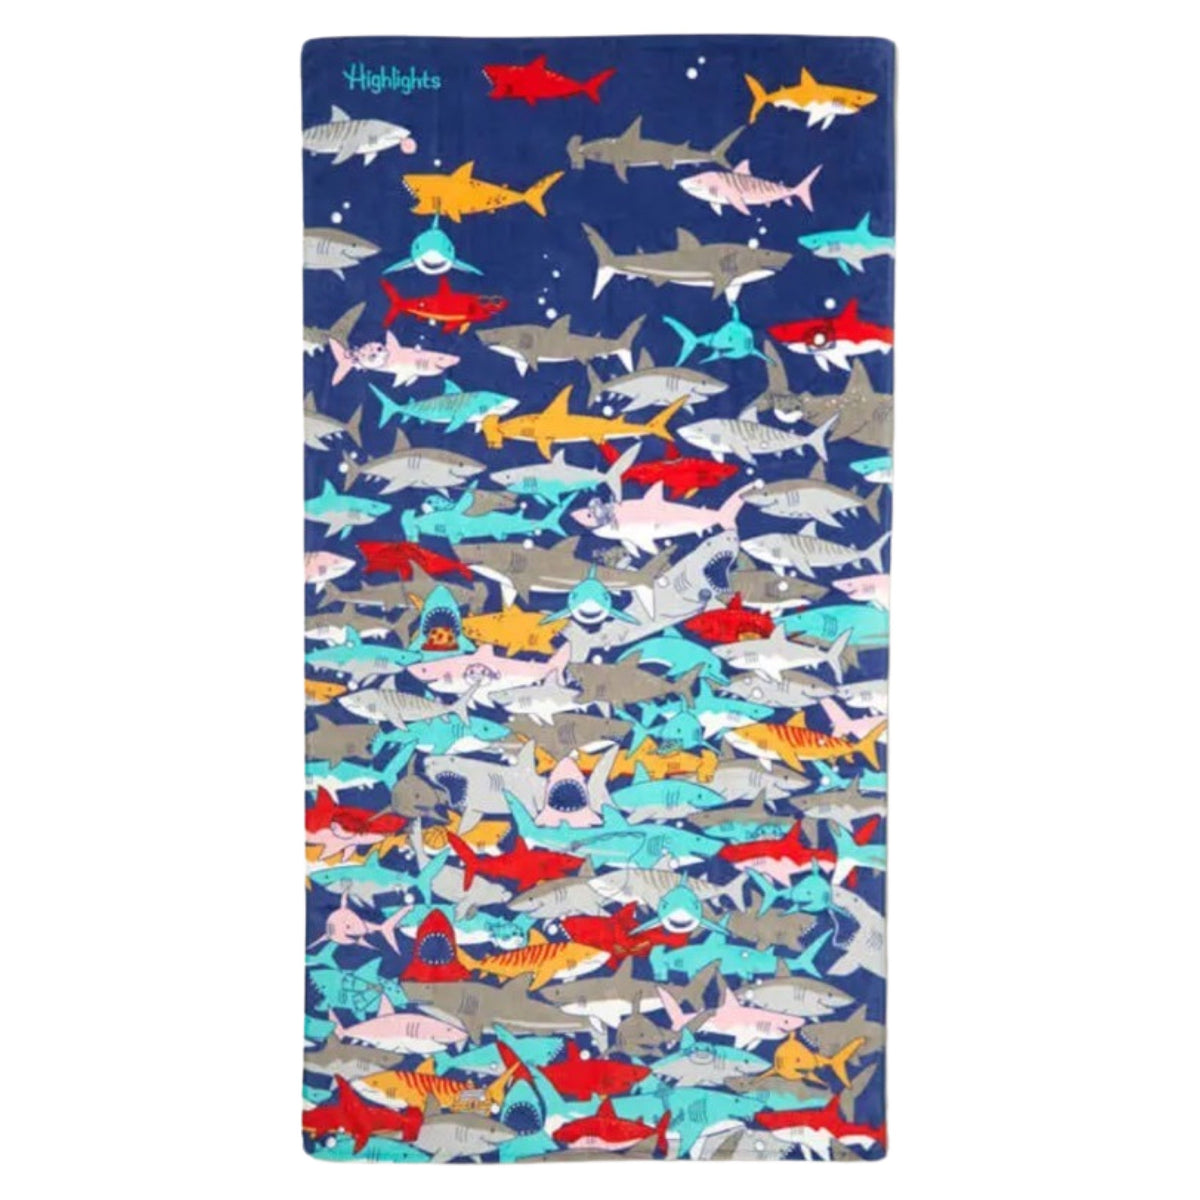 64" Fin-Tastic Shark 100% Cotton Beach Towel by Highlights - Puzzle on Towel!